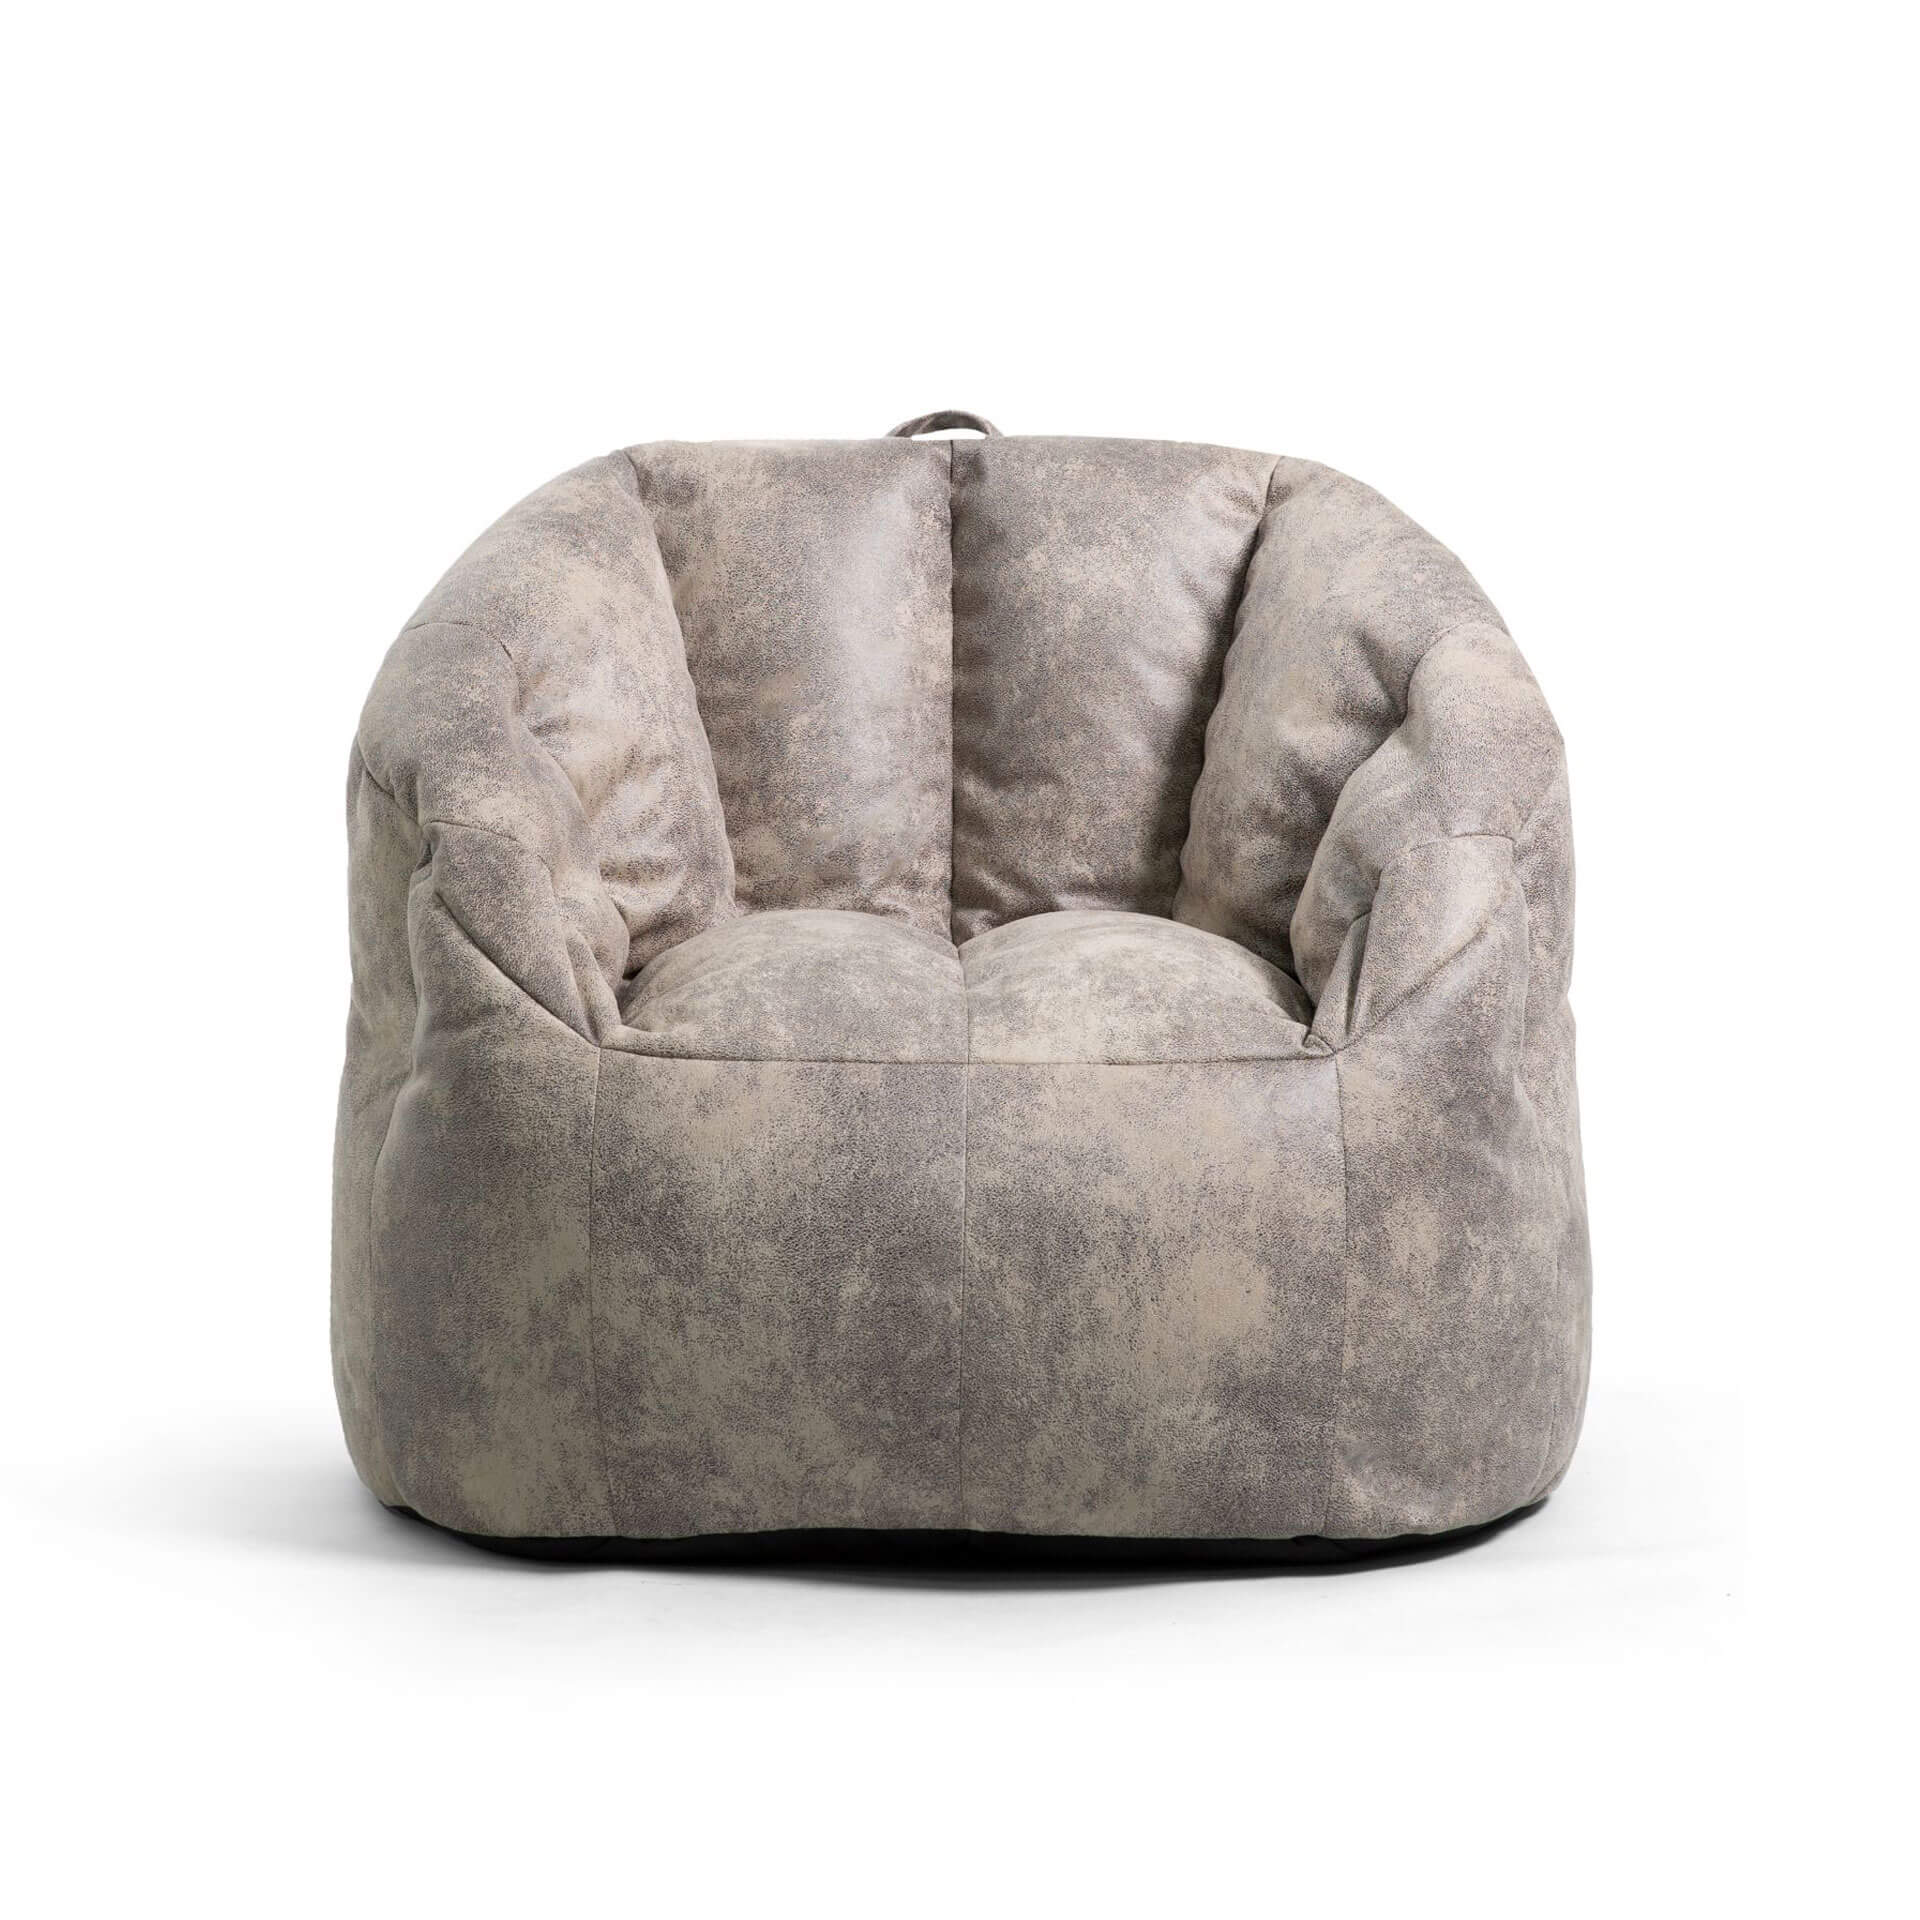 Shop Our 5 Foot Bean Bag Chairs | Ultimate Sack